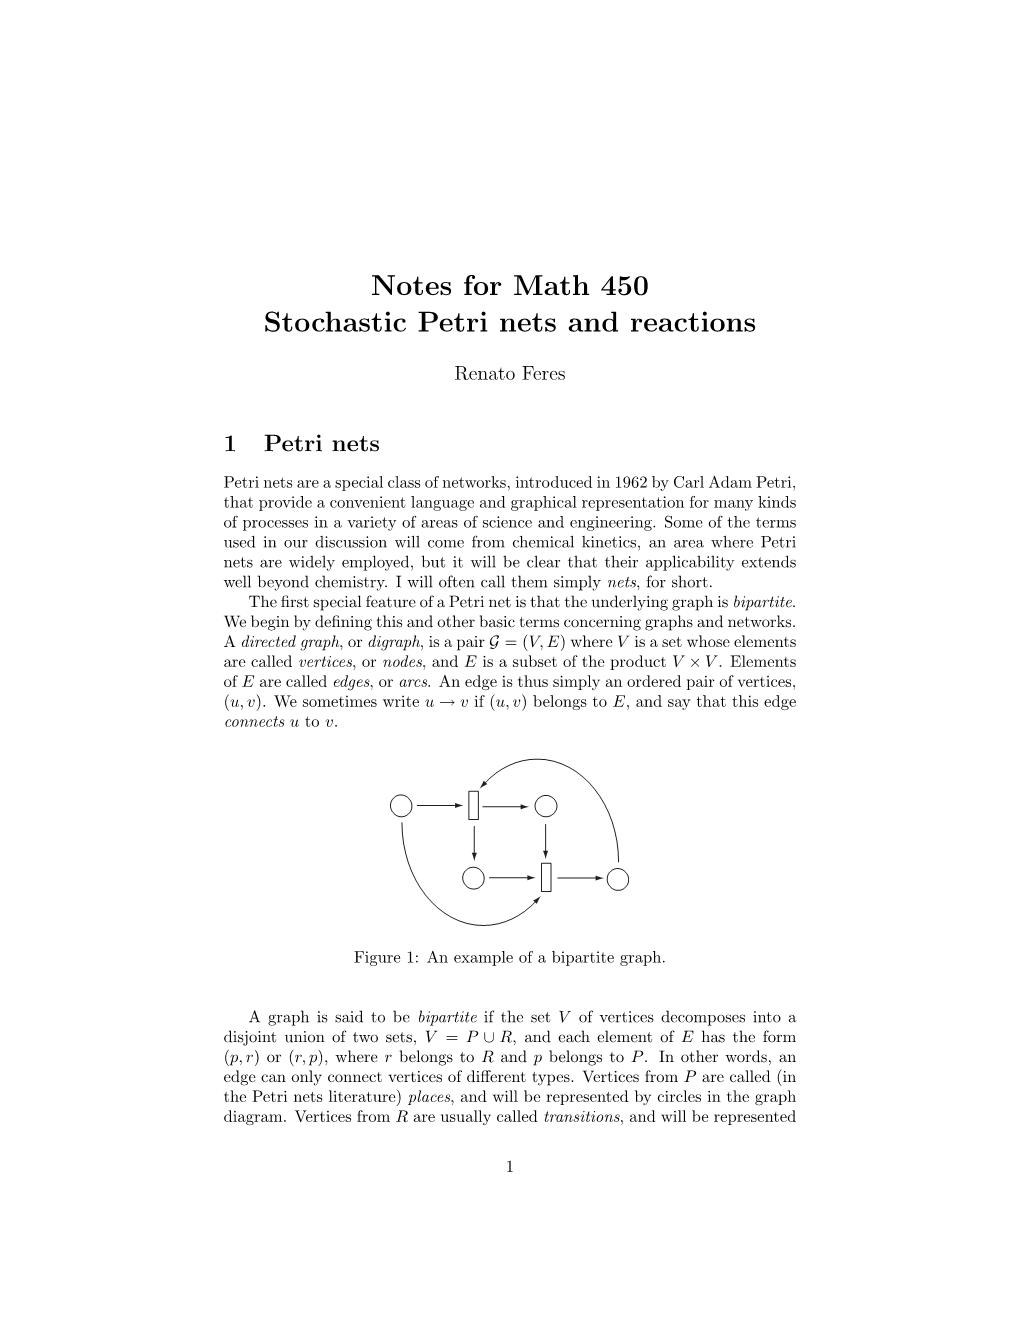 Notes for Math 450 Stochastic Petri Nets and Reactions